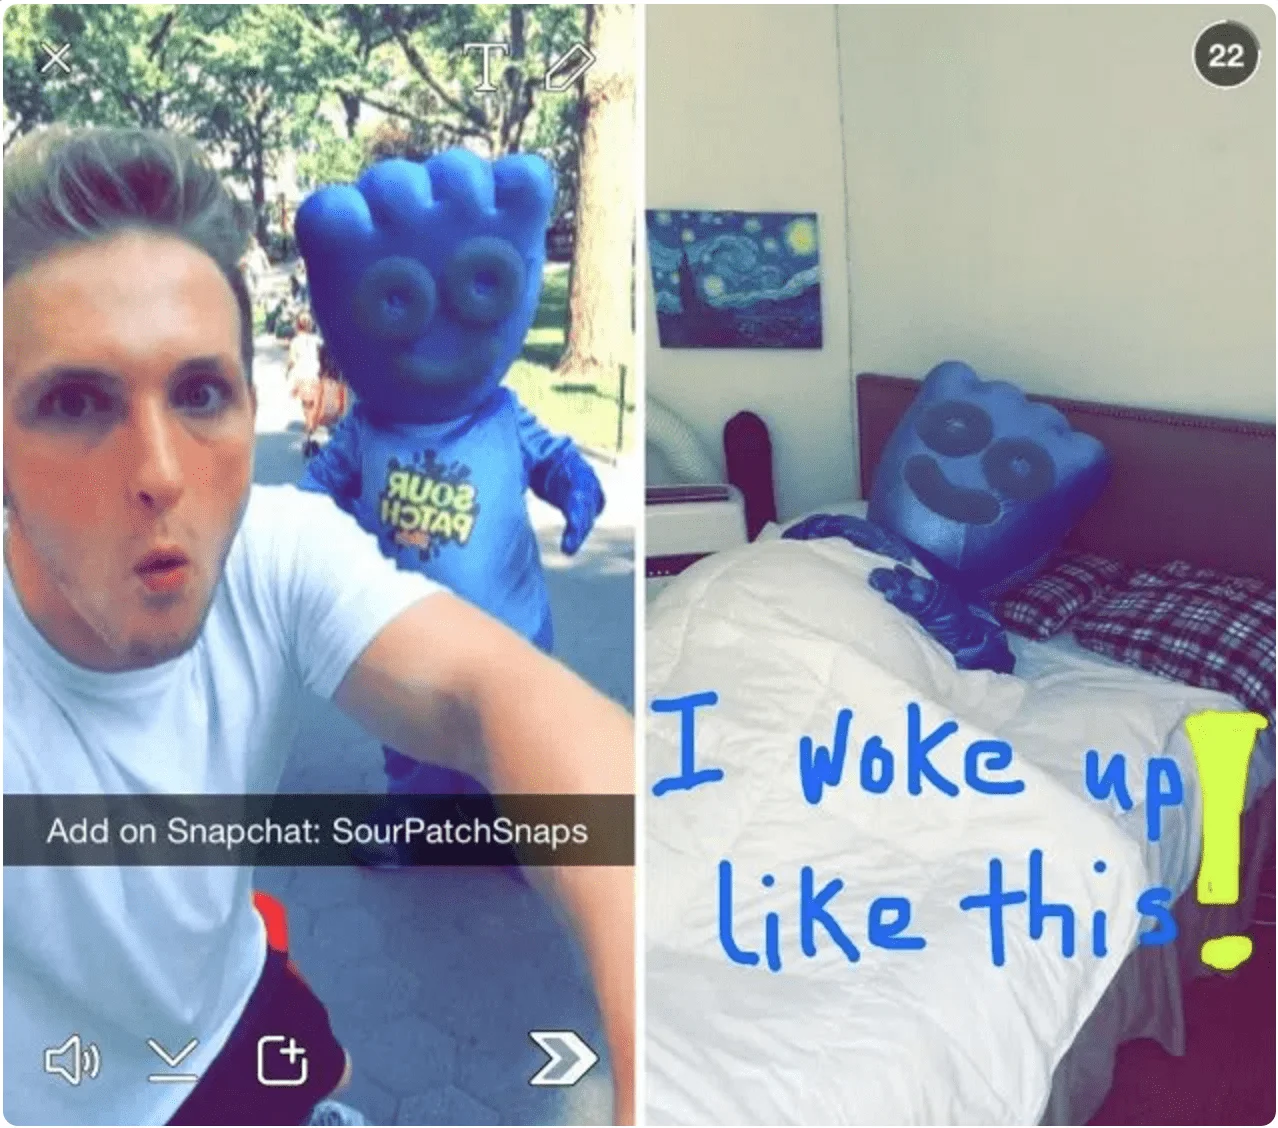 Snapchat Updates for Creators, Businesses to Take on Instagram